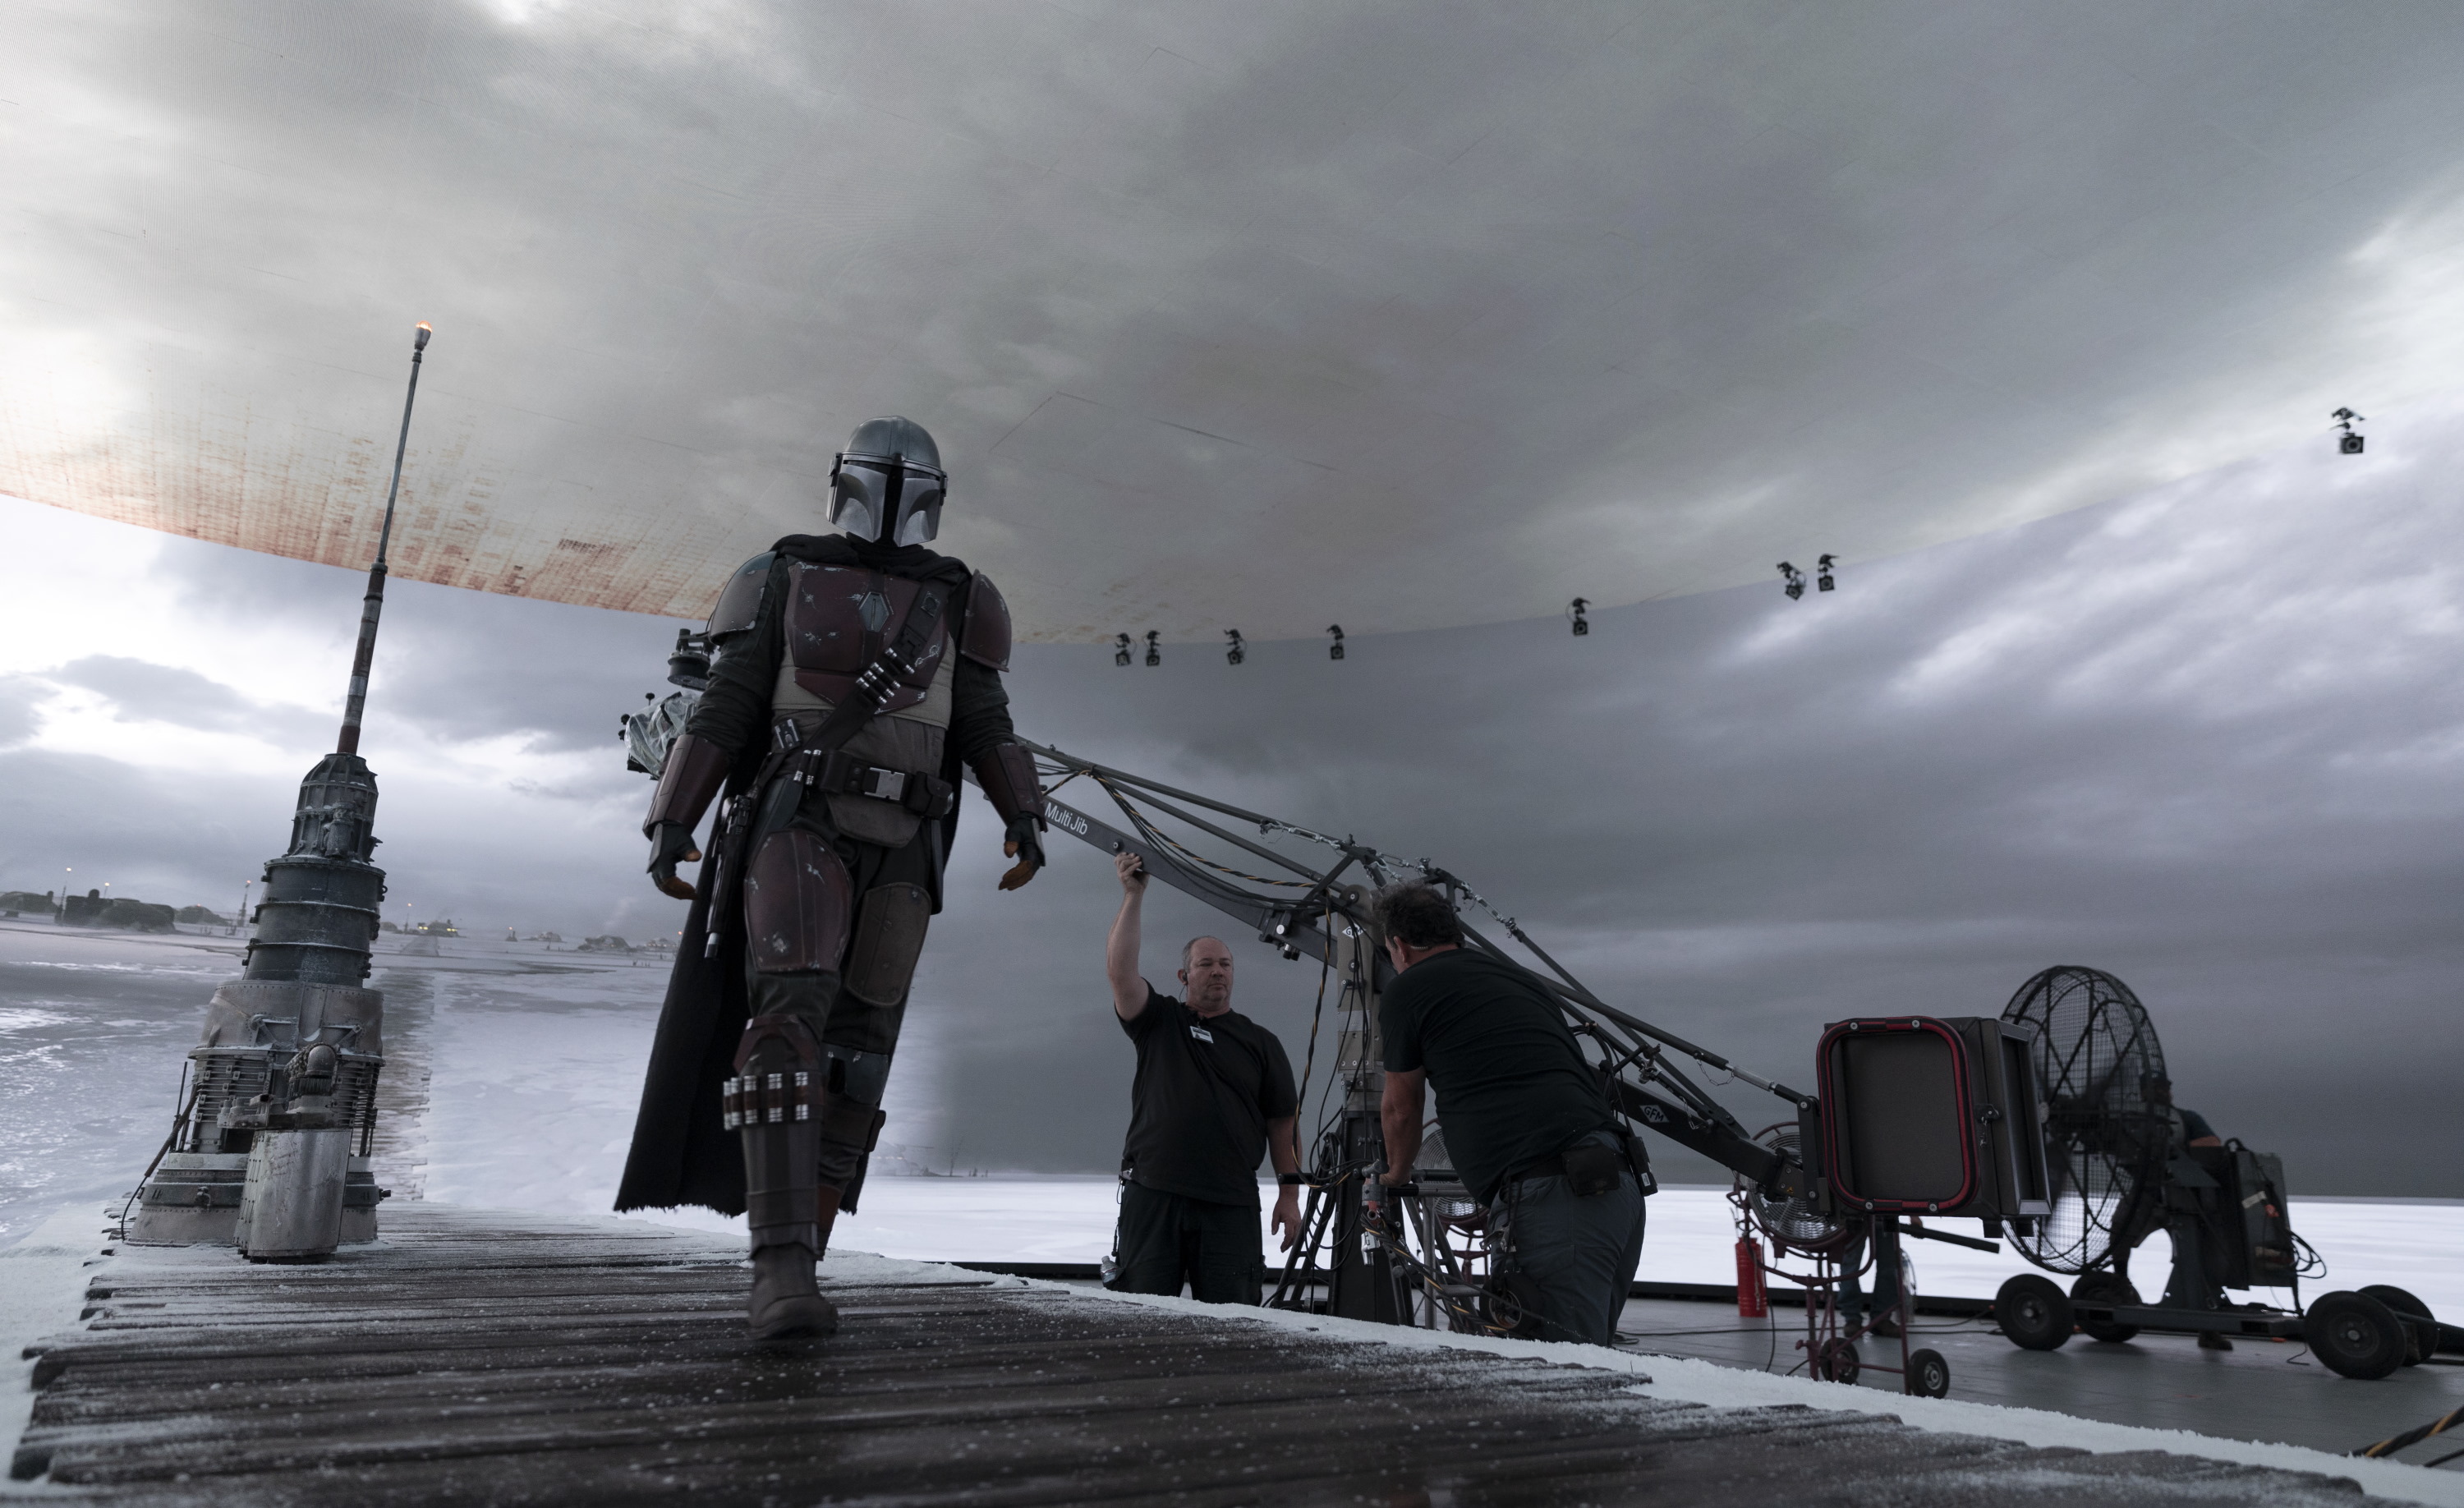 How 'The Mandalorian' and ILM invisibly reinvented film and TV production | TechCrunch